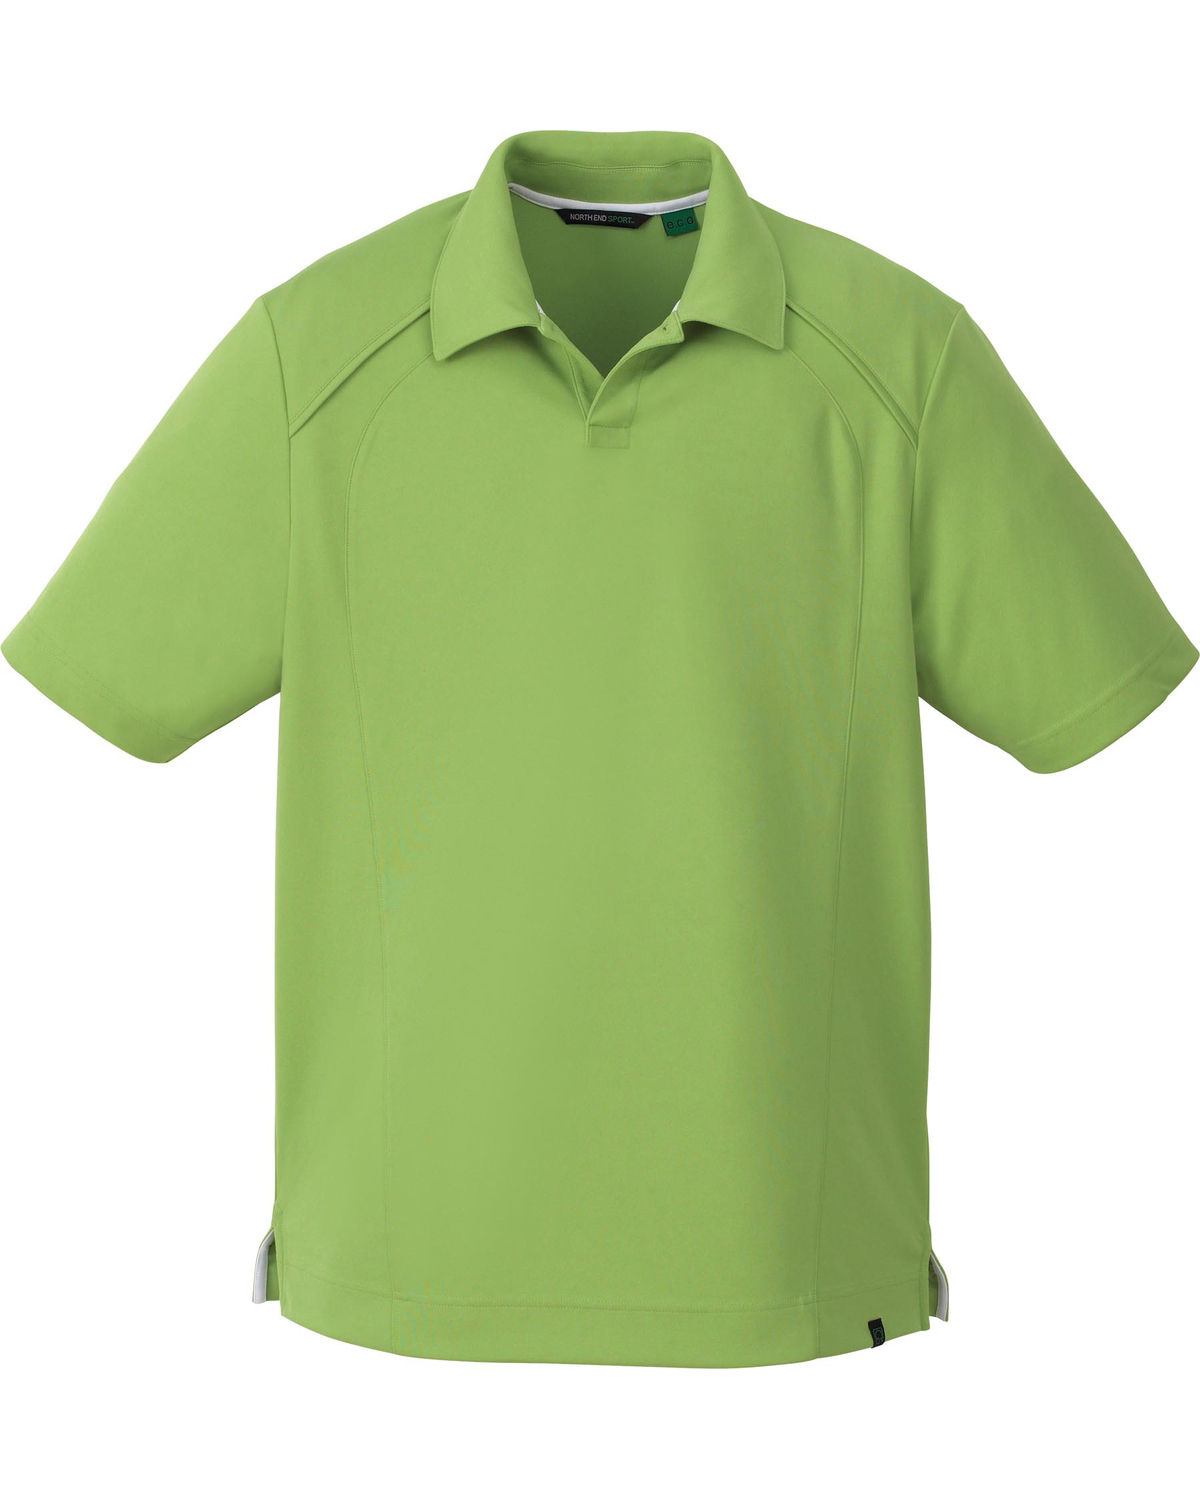 North End 88632 - Men's Recycled Polyester Performance Pique Polo